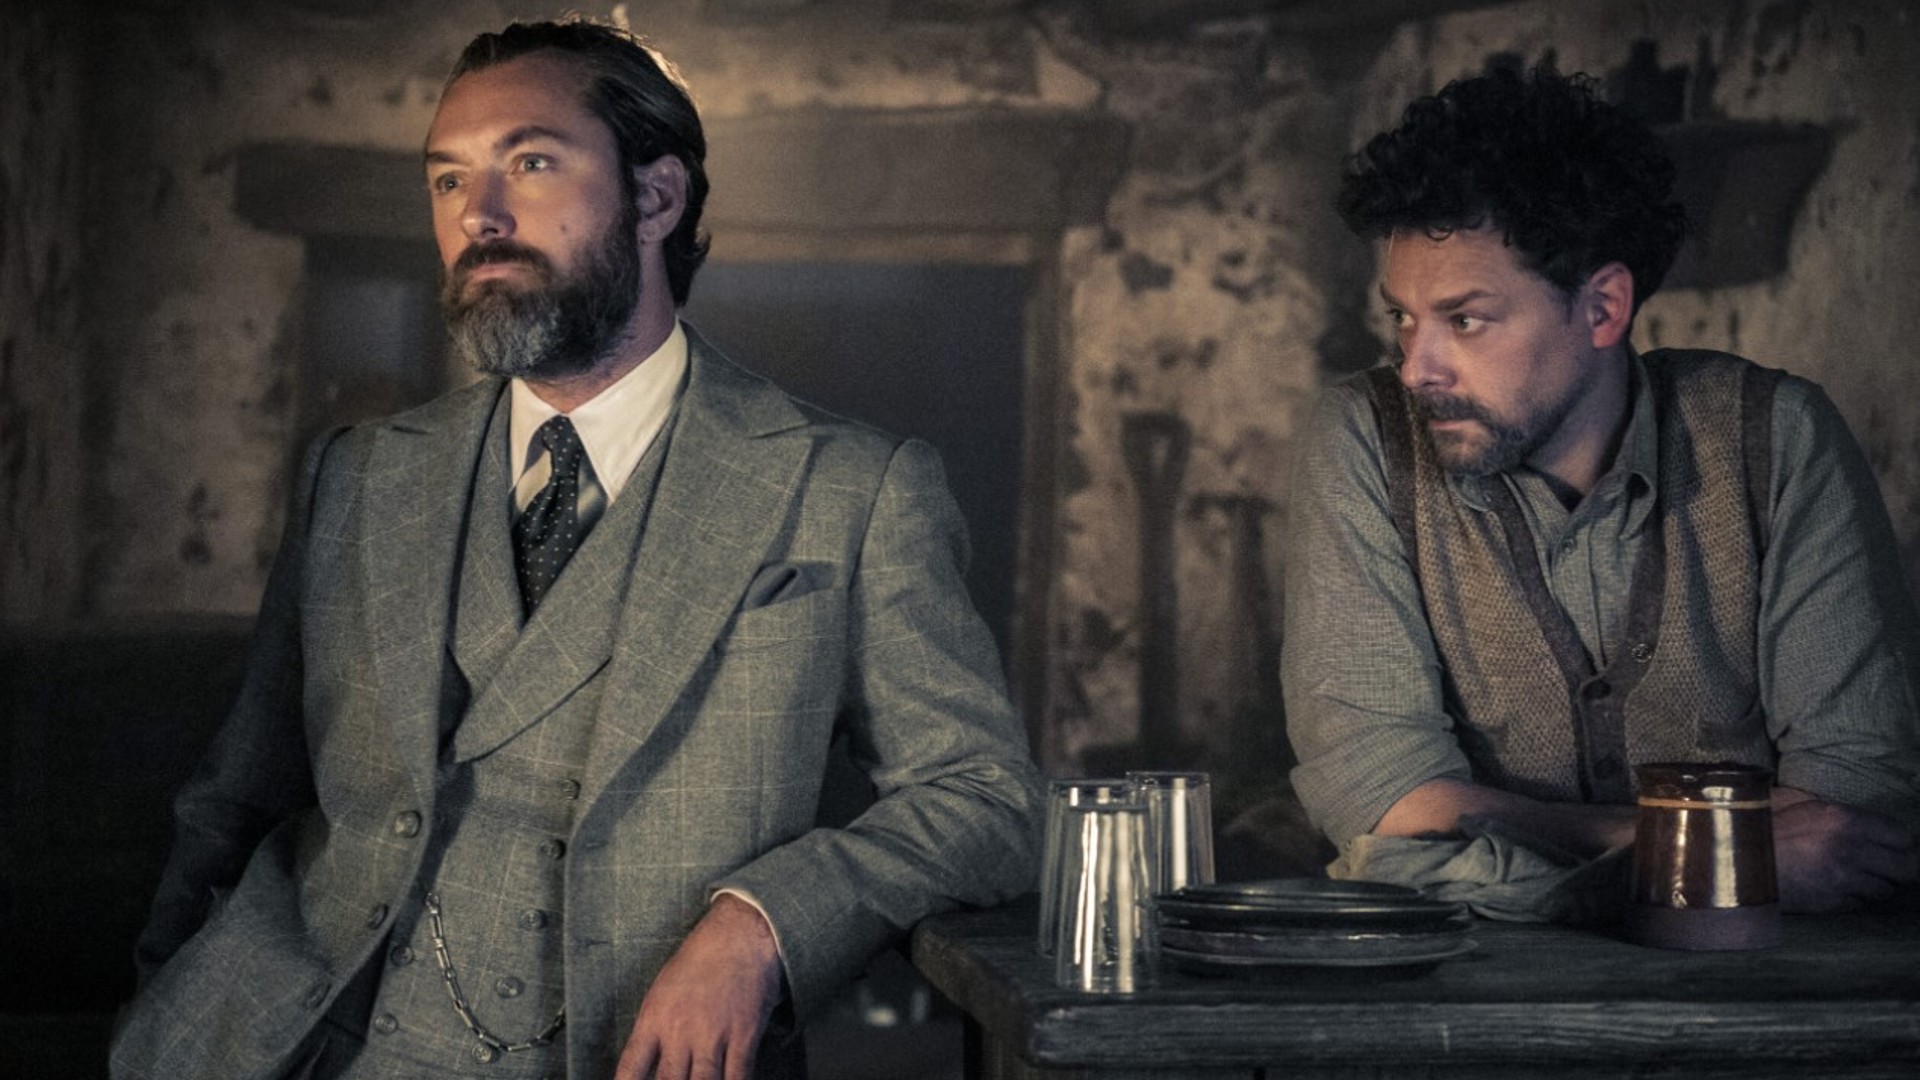 Jude Law as Albus Dumbledore and Richard Coyle as Aberforth Dumbledore in Fantastic Beasts: The Secrets of Dumbledore